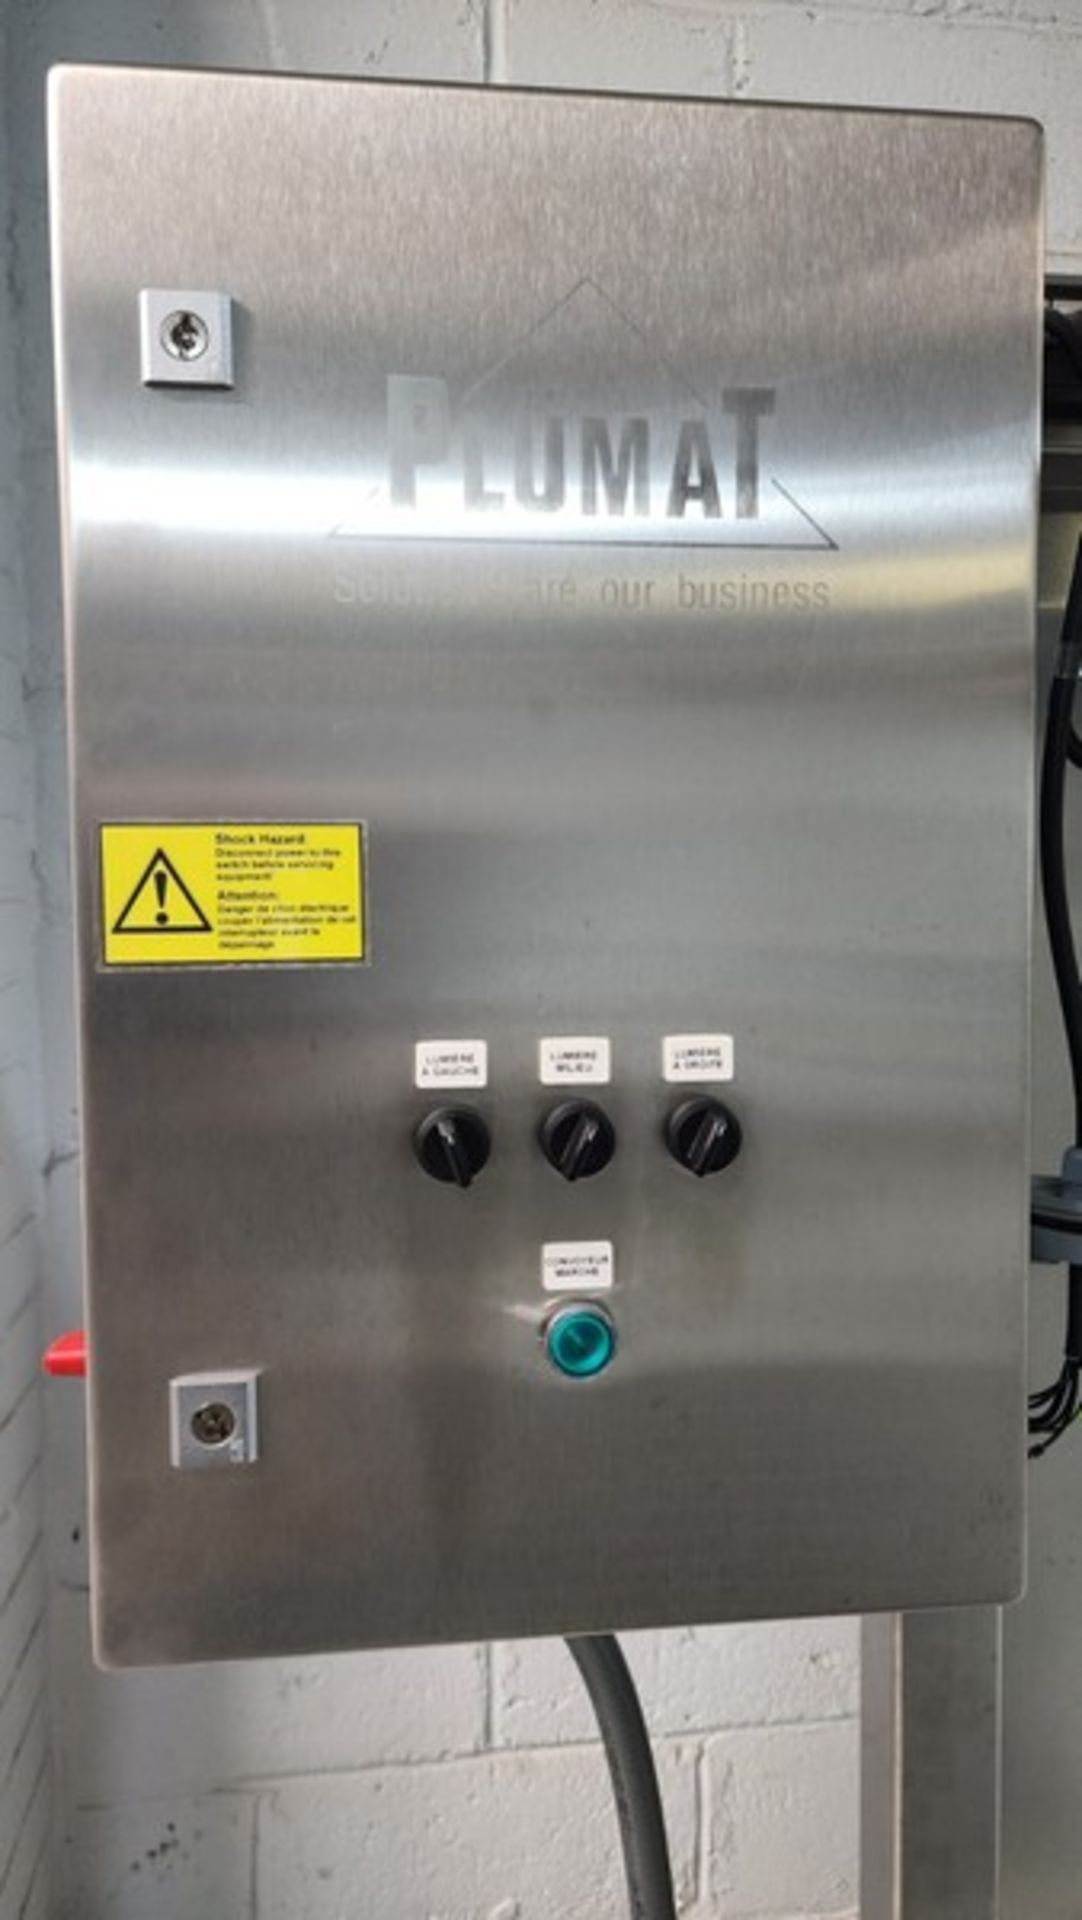 Plumat Visual Inspection System. Type QCB 030. 230/400 volts. 3ph, 60 hz, 10 amps. Great condition